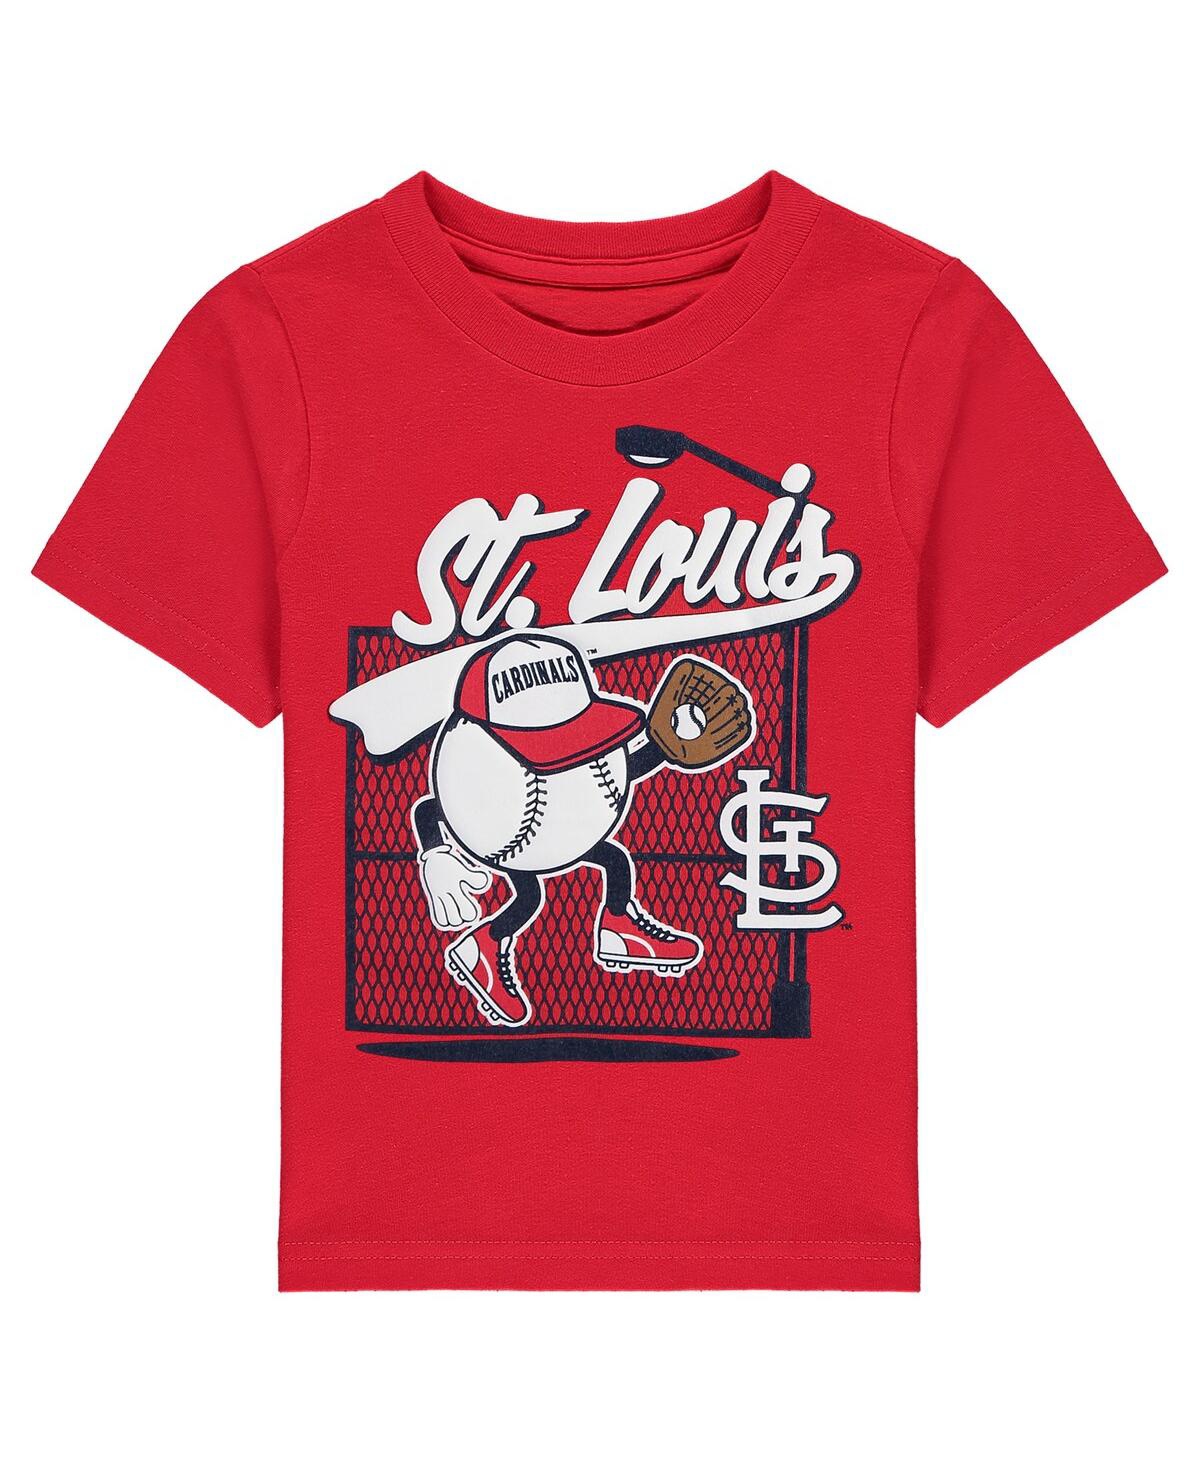 Shop Outerstuff Toddler Boys And Girls Red St. Louis Cardinals On The Fence T-shirt